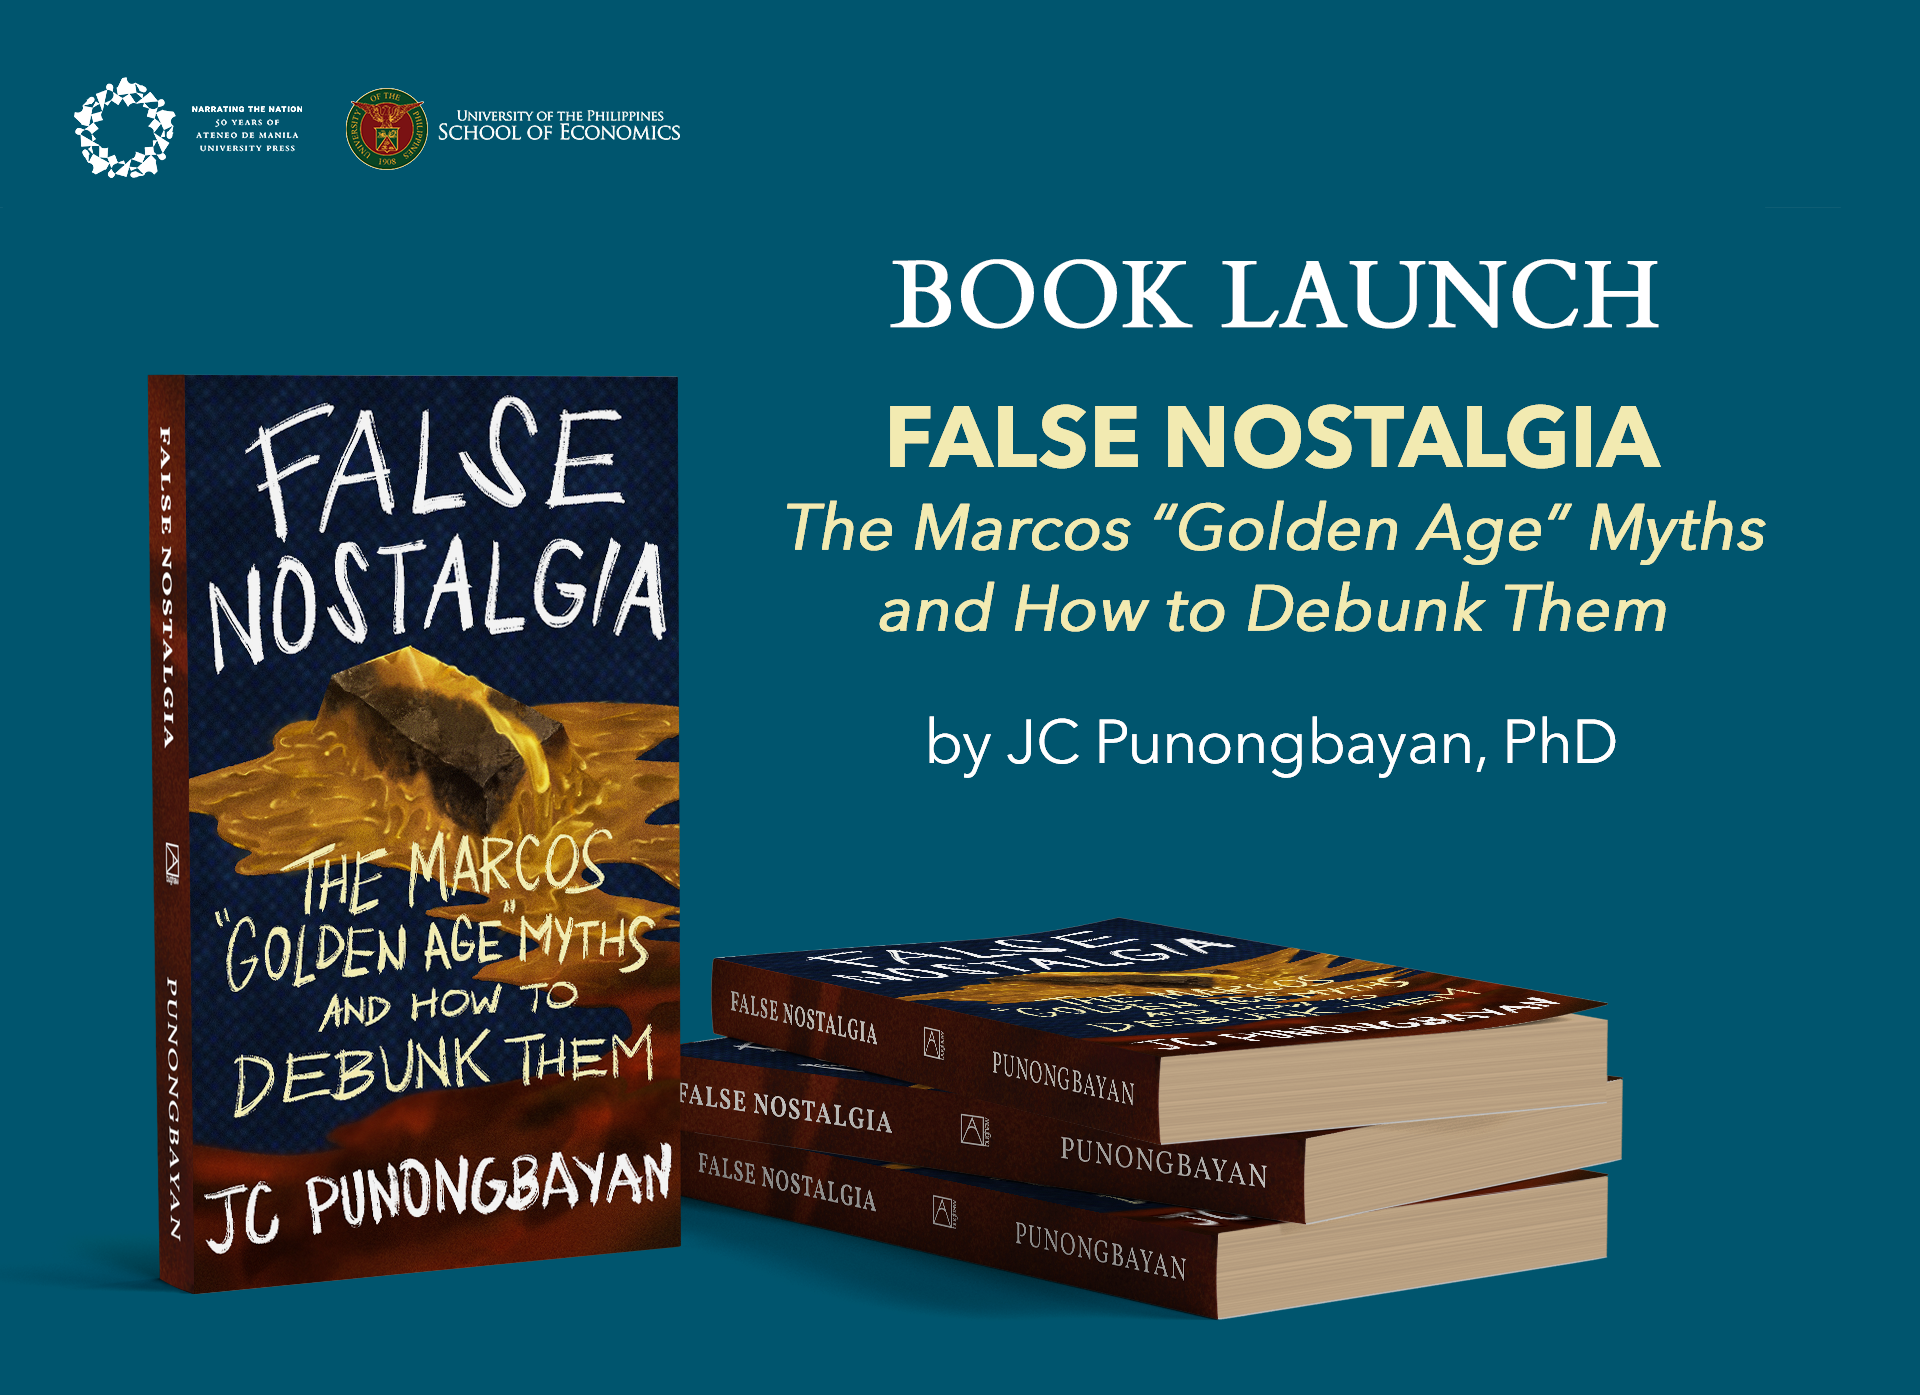 Book launch of False Nostalgia: The Marcos "Golden Age" Myths and How to Debunk Them